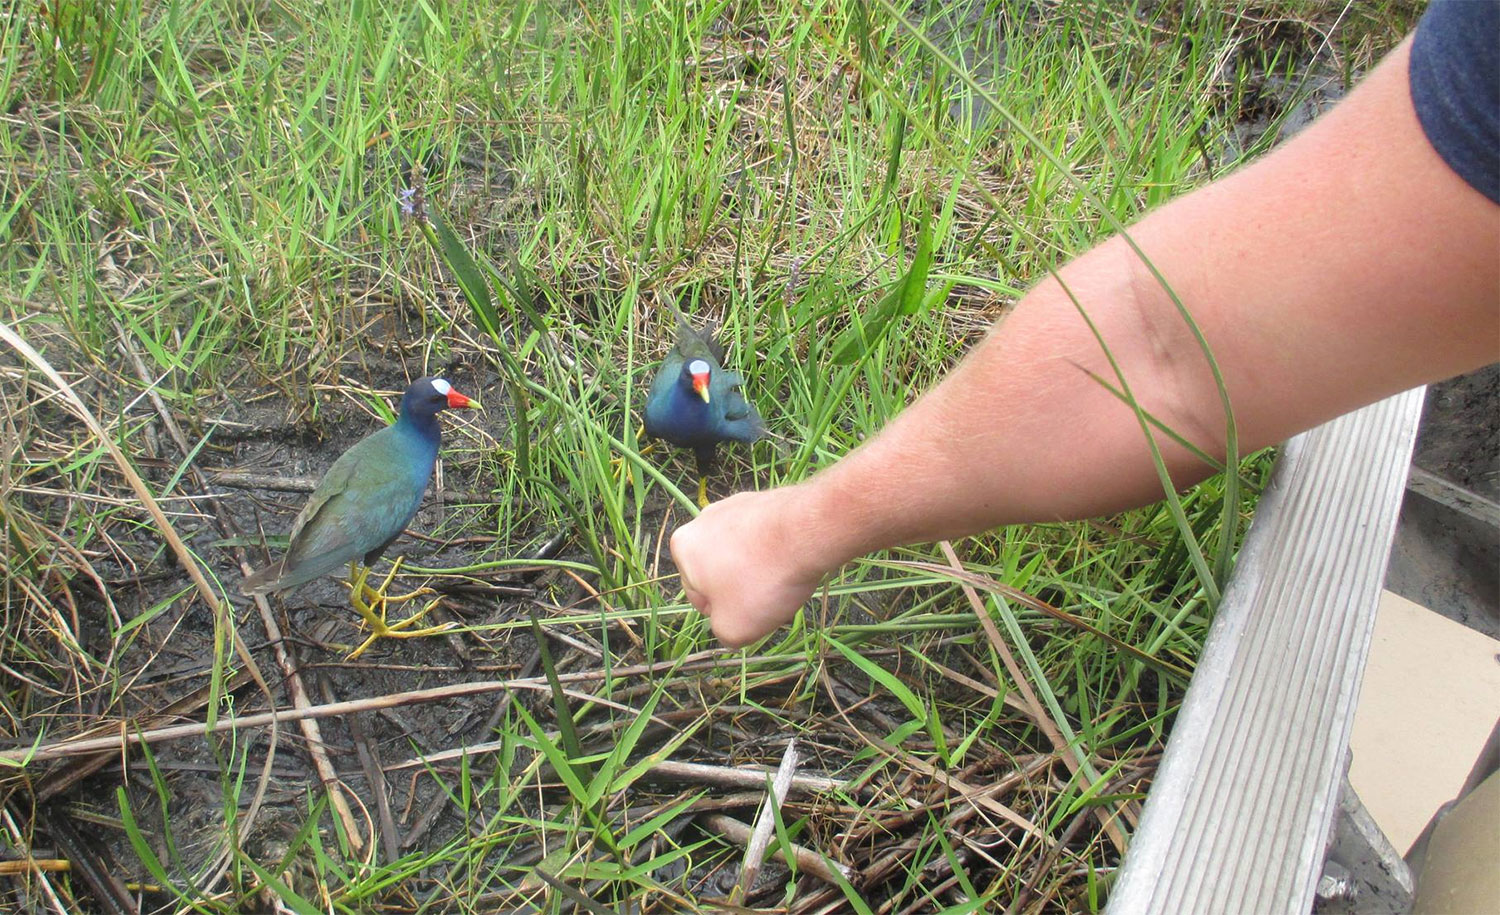 Lee Walpole almost pecked to death by little bird creature during Everglades tour, Miami